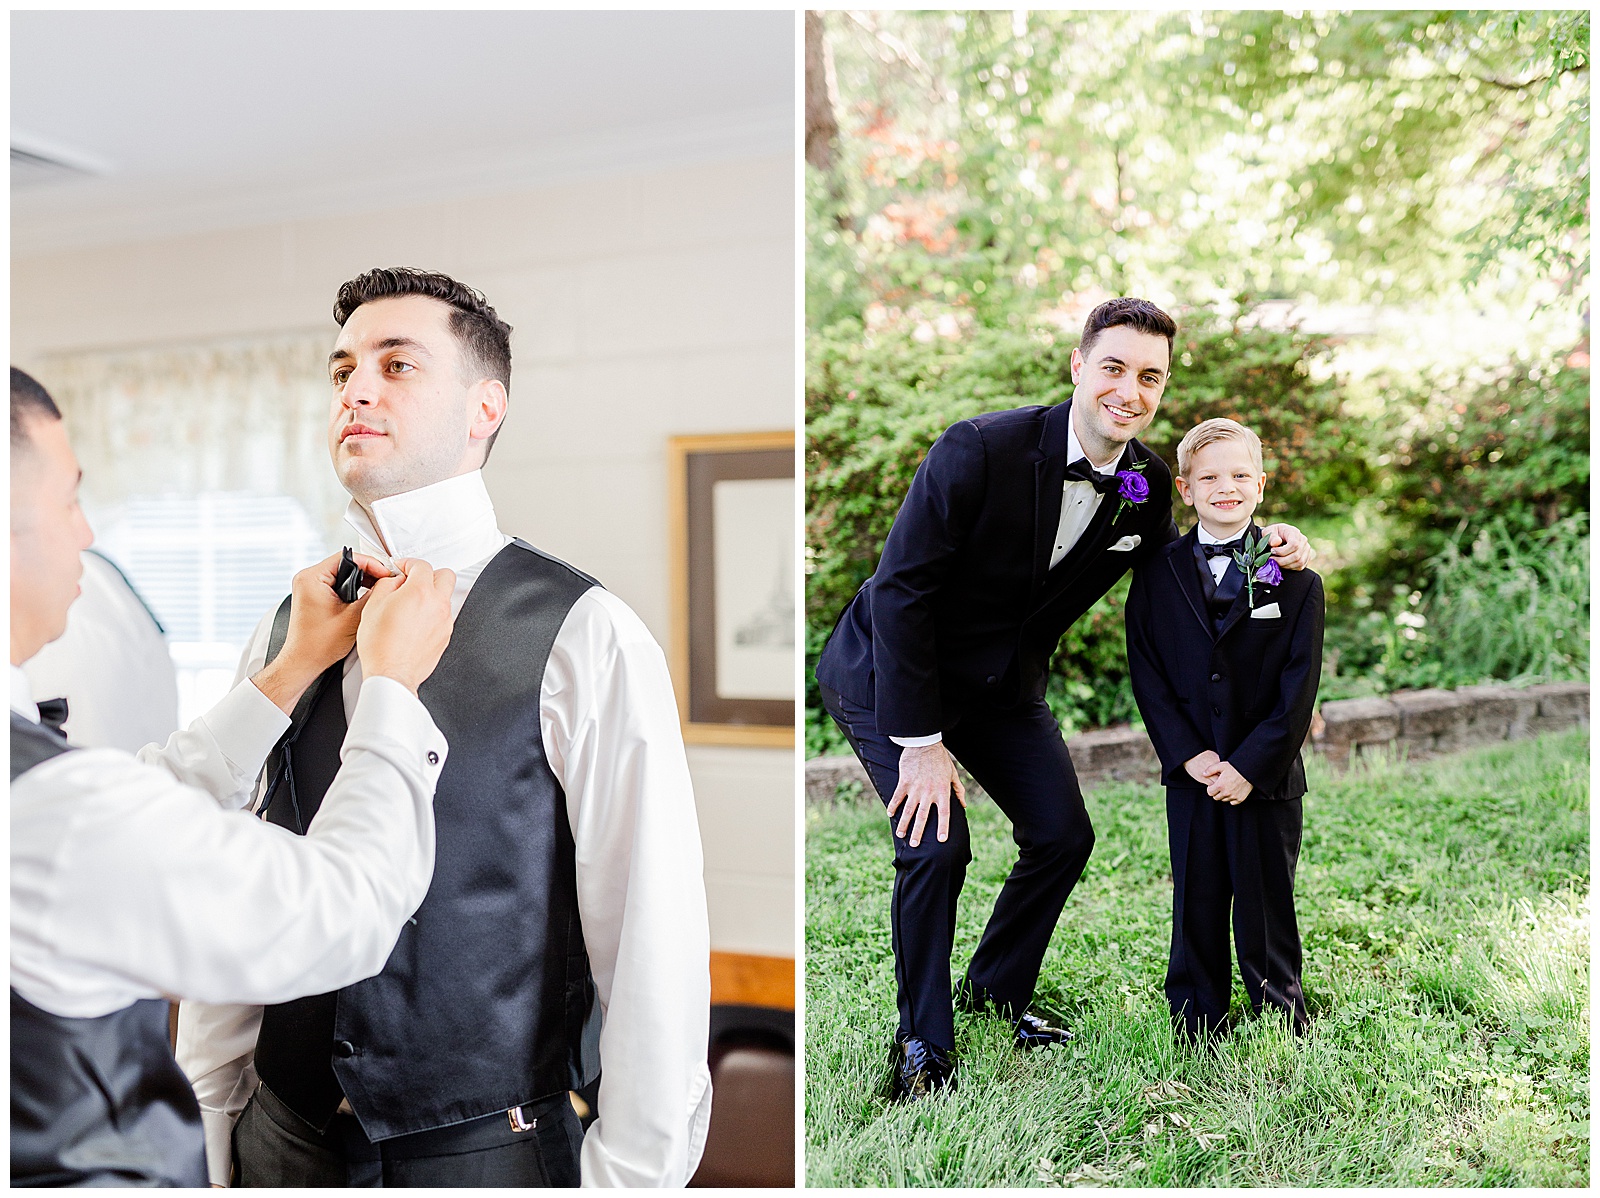 💍 groom and groomsmen getting ready shot and cute ring boy 🤵 Groom: black tux tuxedo and purple flower boutonnière 💍 Bright Colorful Summer City Wedding in Charlotte, NC with Taryn and Ryan | Kevyn Dixon Photography